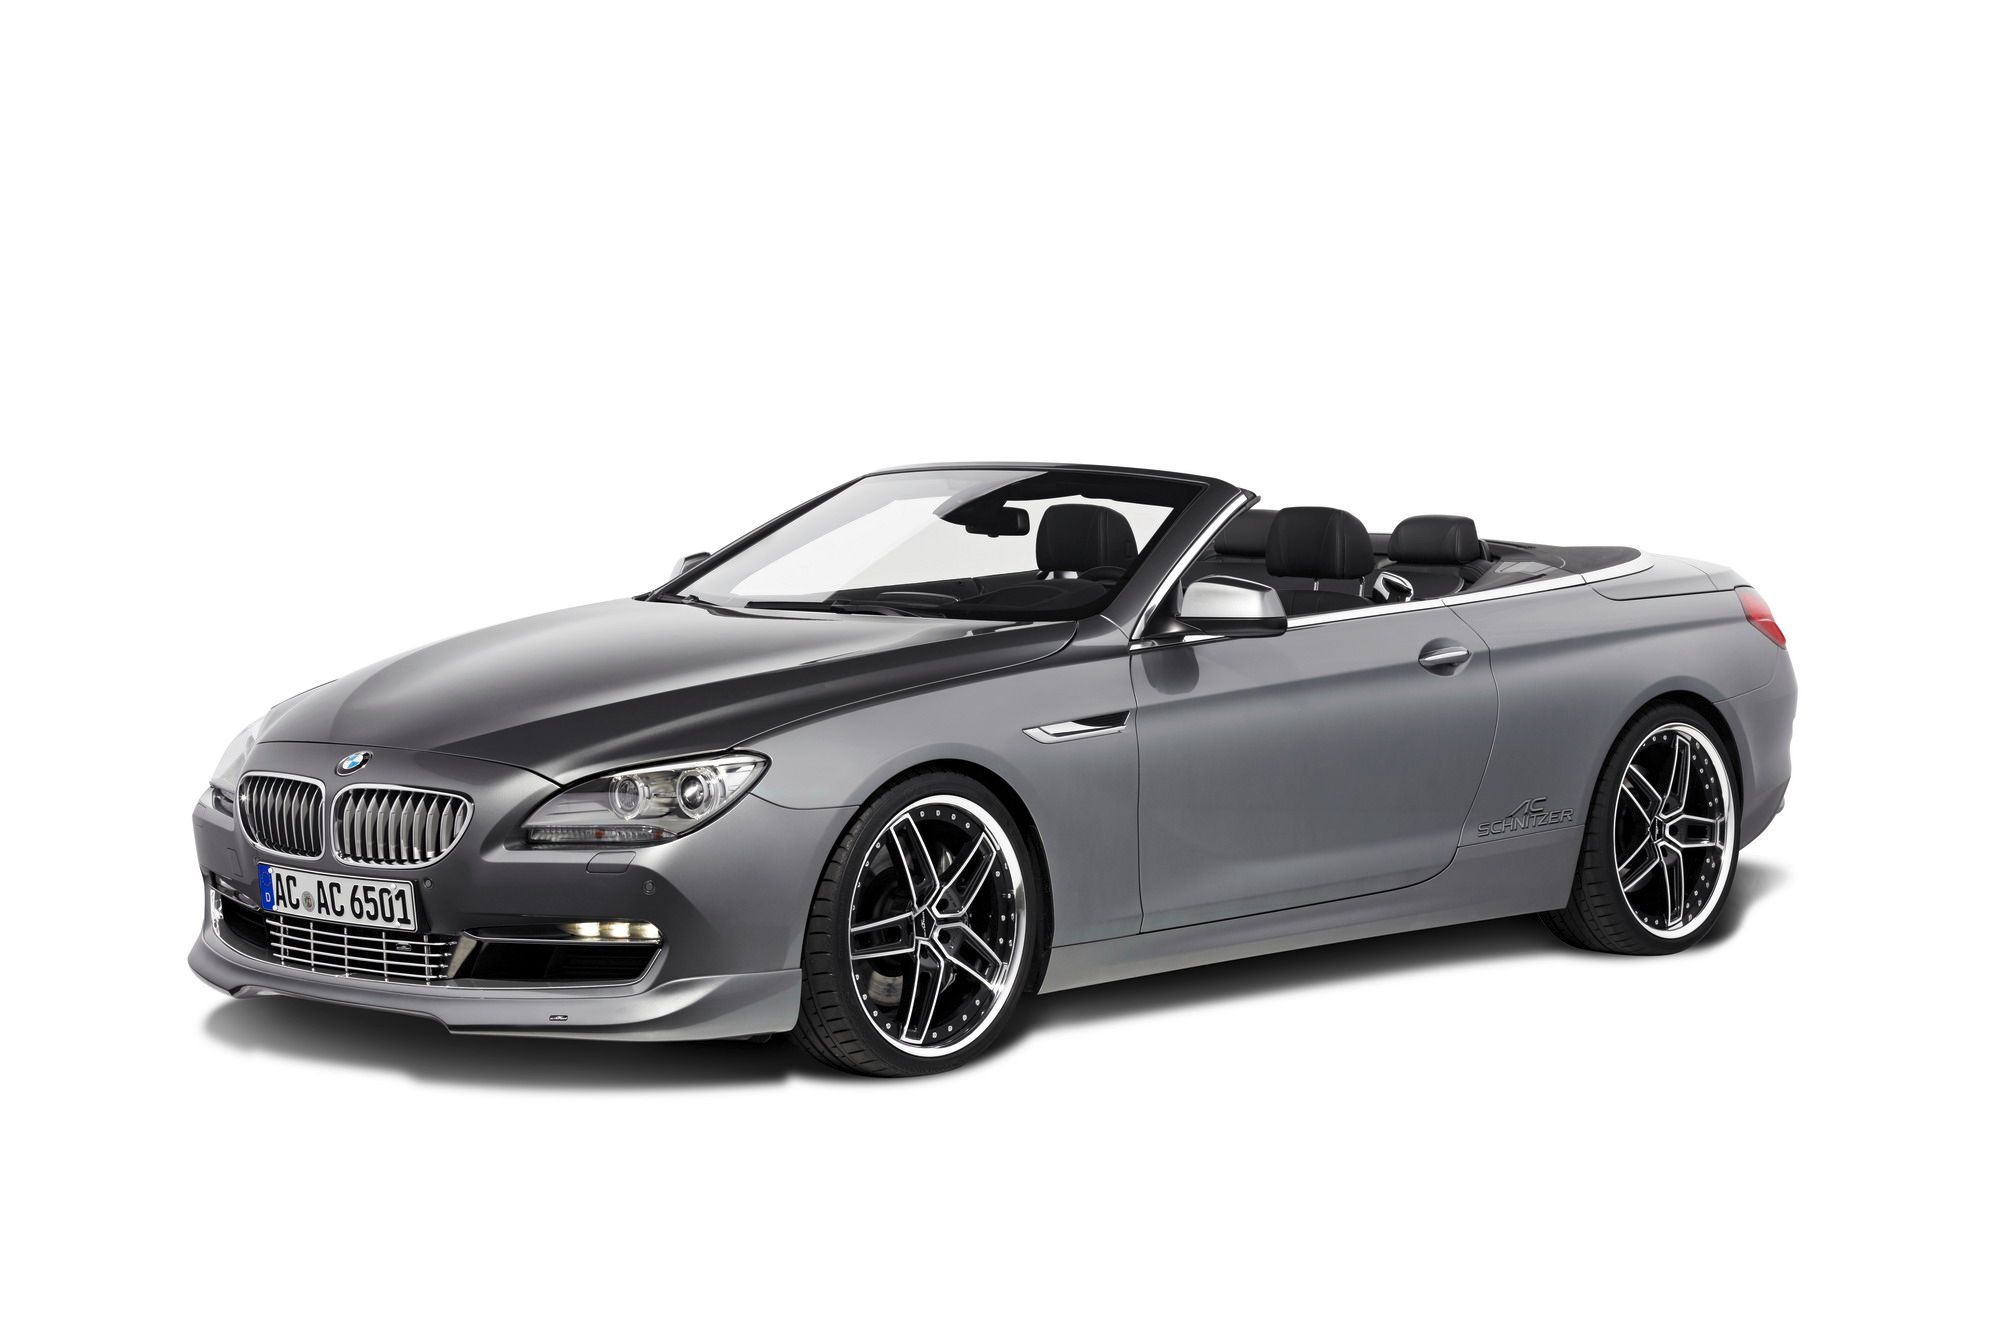 2012 BMW 650i Convertible by AC Schnitzer